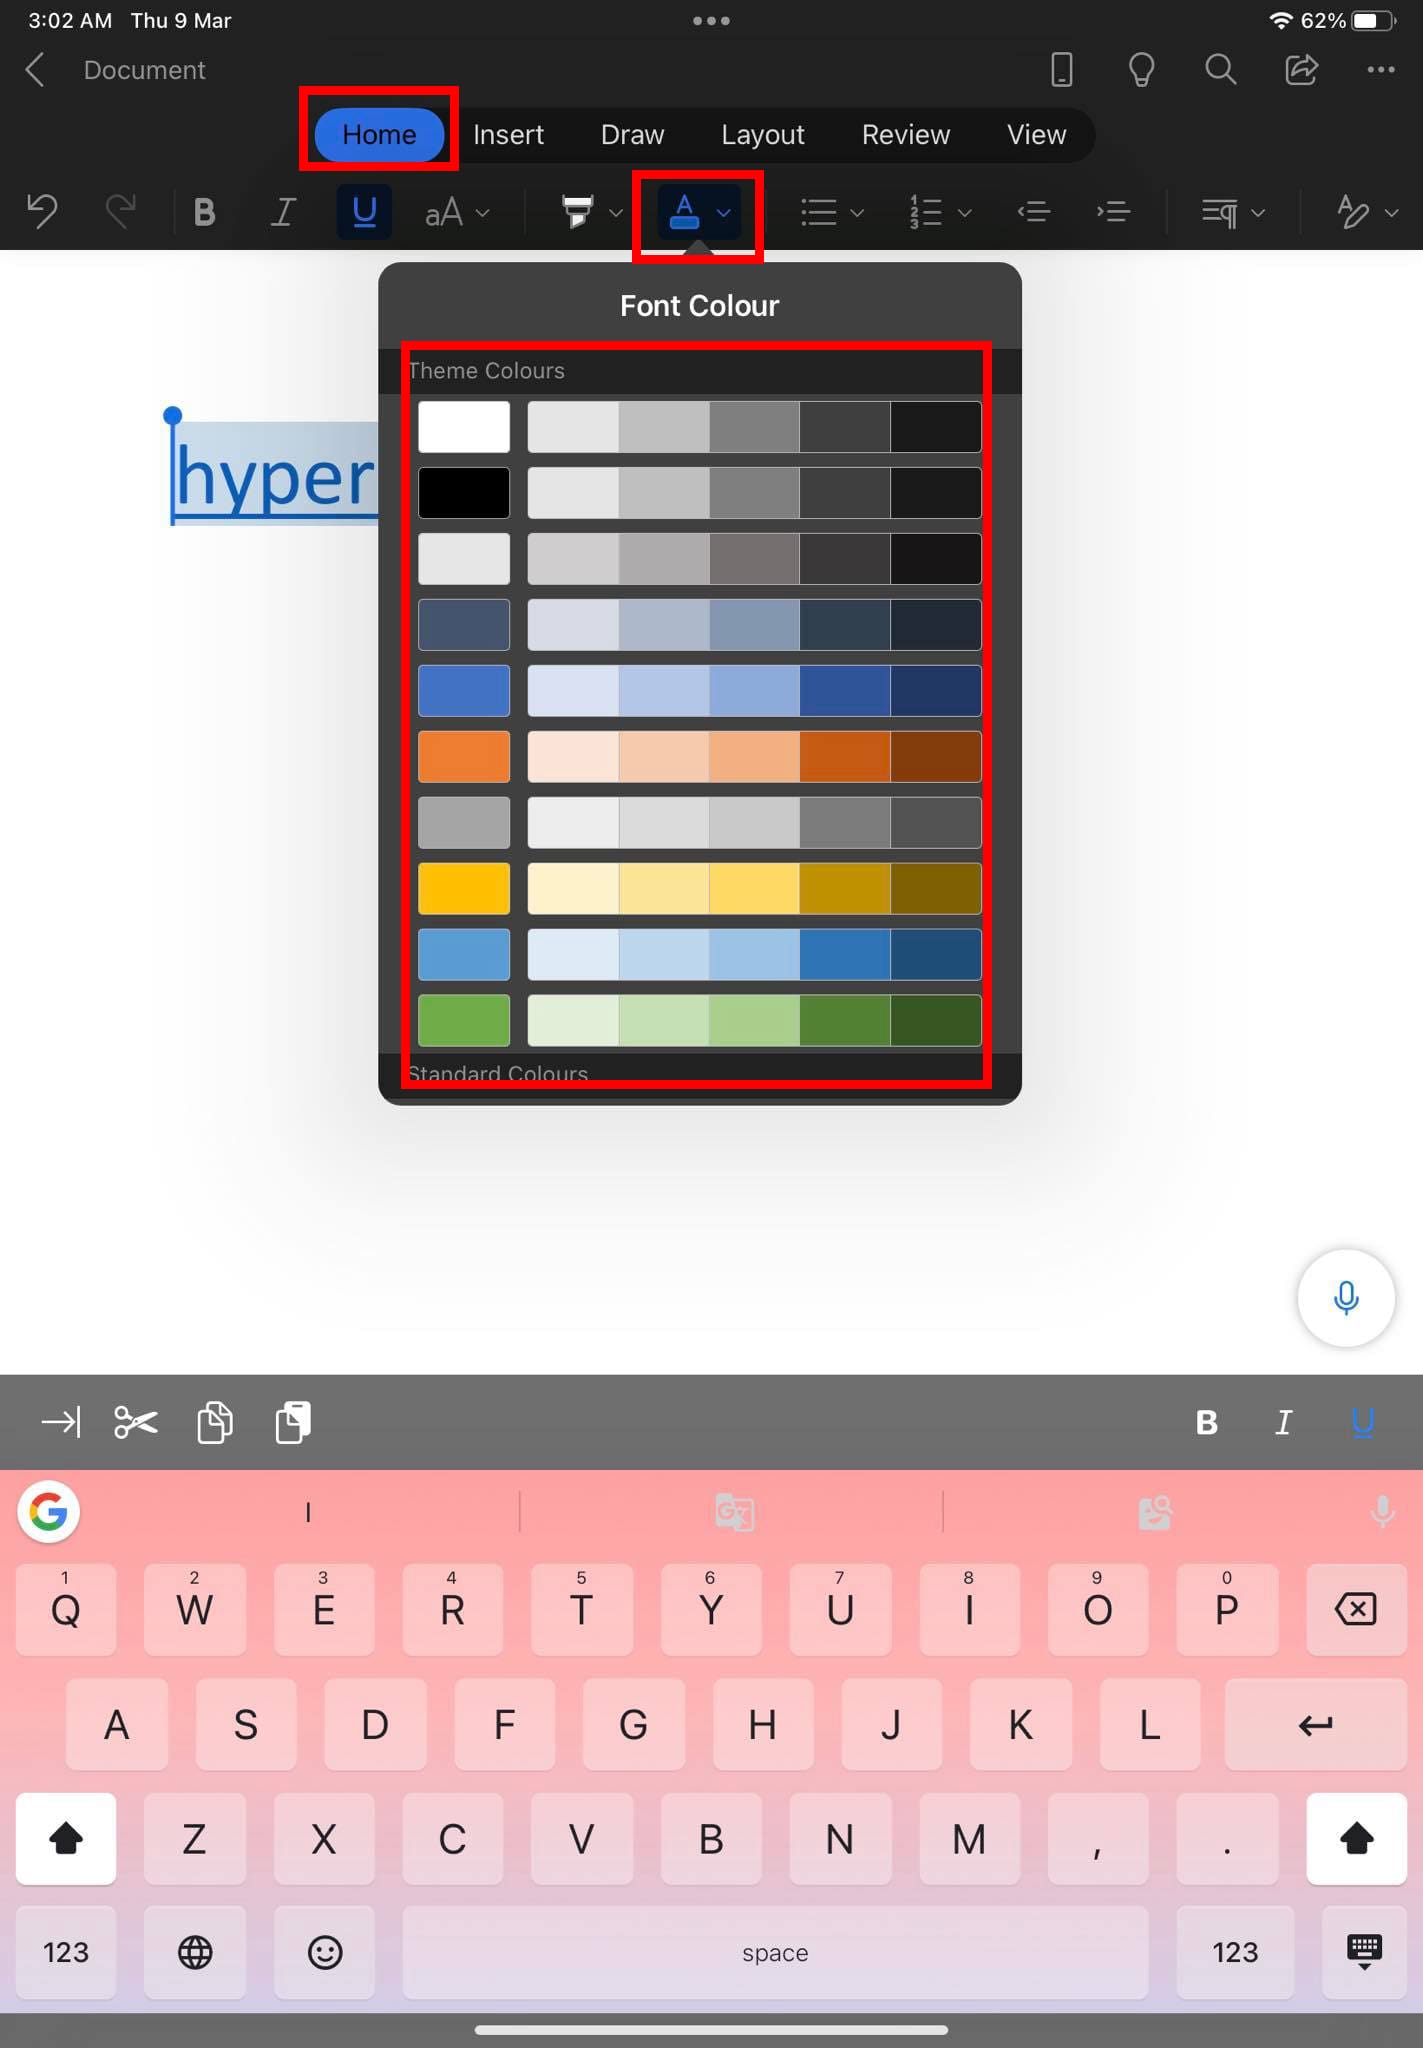 The font color in iPad Word app for hyperlink color modifications